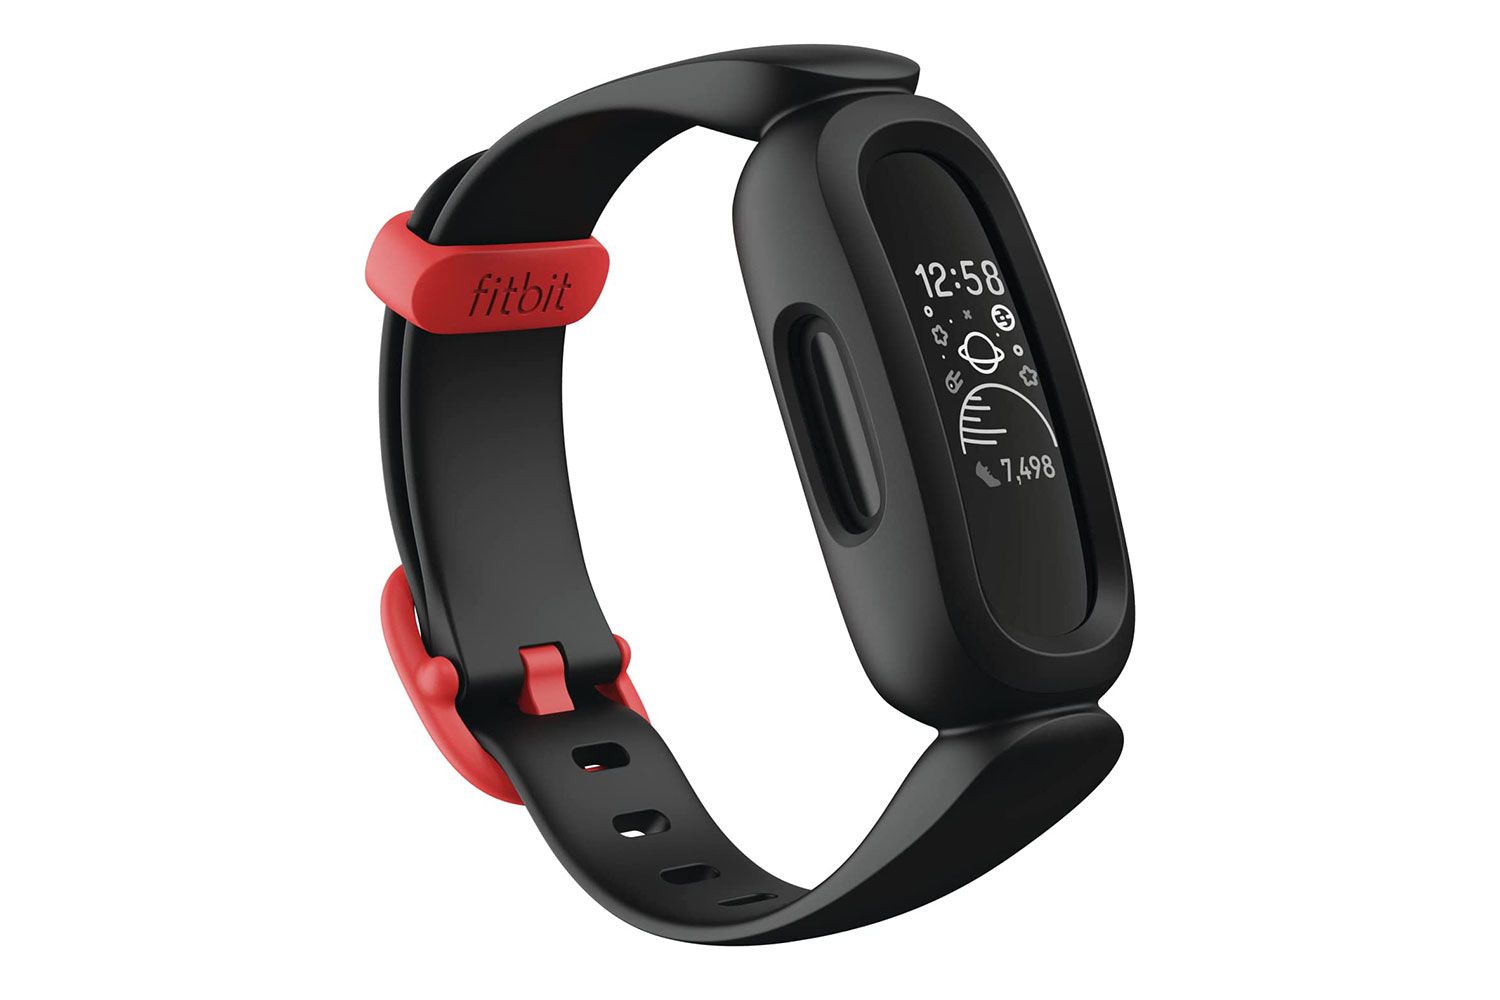 Amazon Fitbit Ace 3 Activity Tracker for Kids 6+ One Size, Black/Racer Red